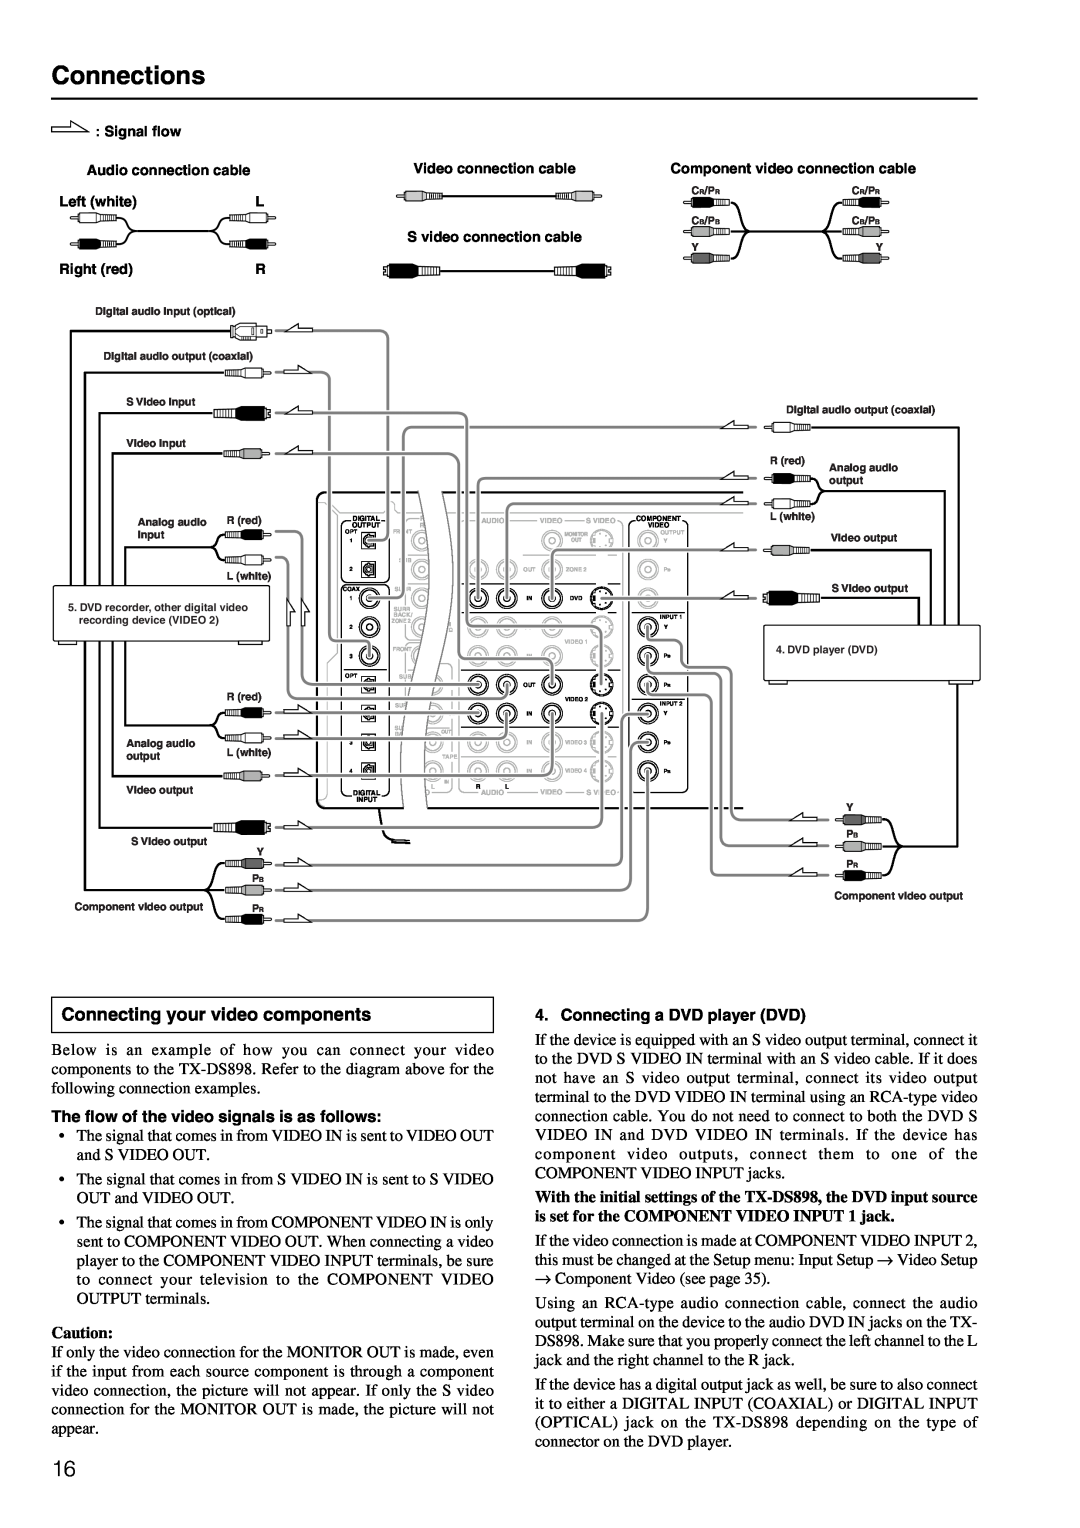 Onkyo TX-DS898 instruction manual Connections, Connecting your video components 